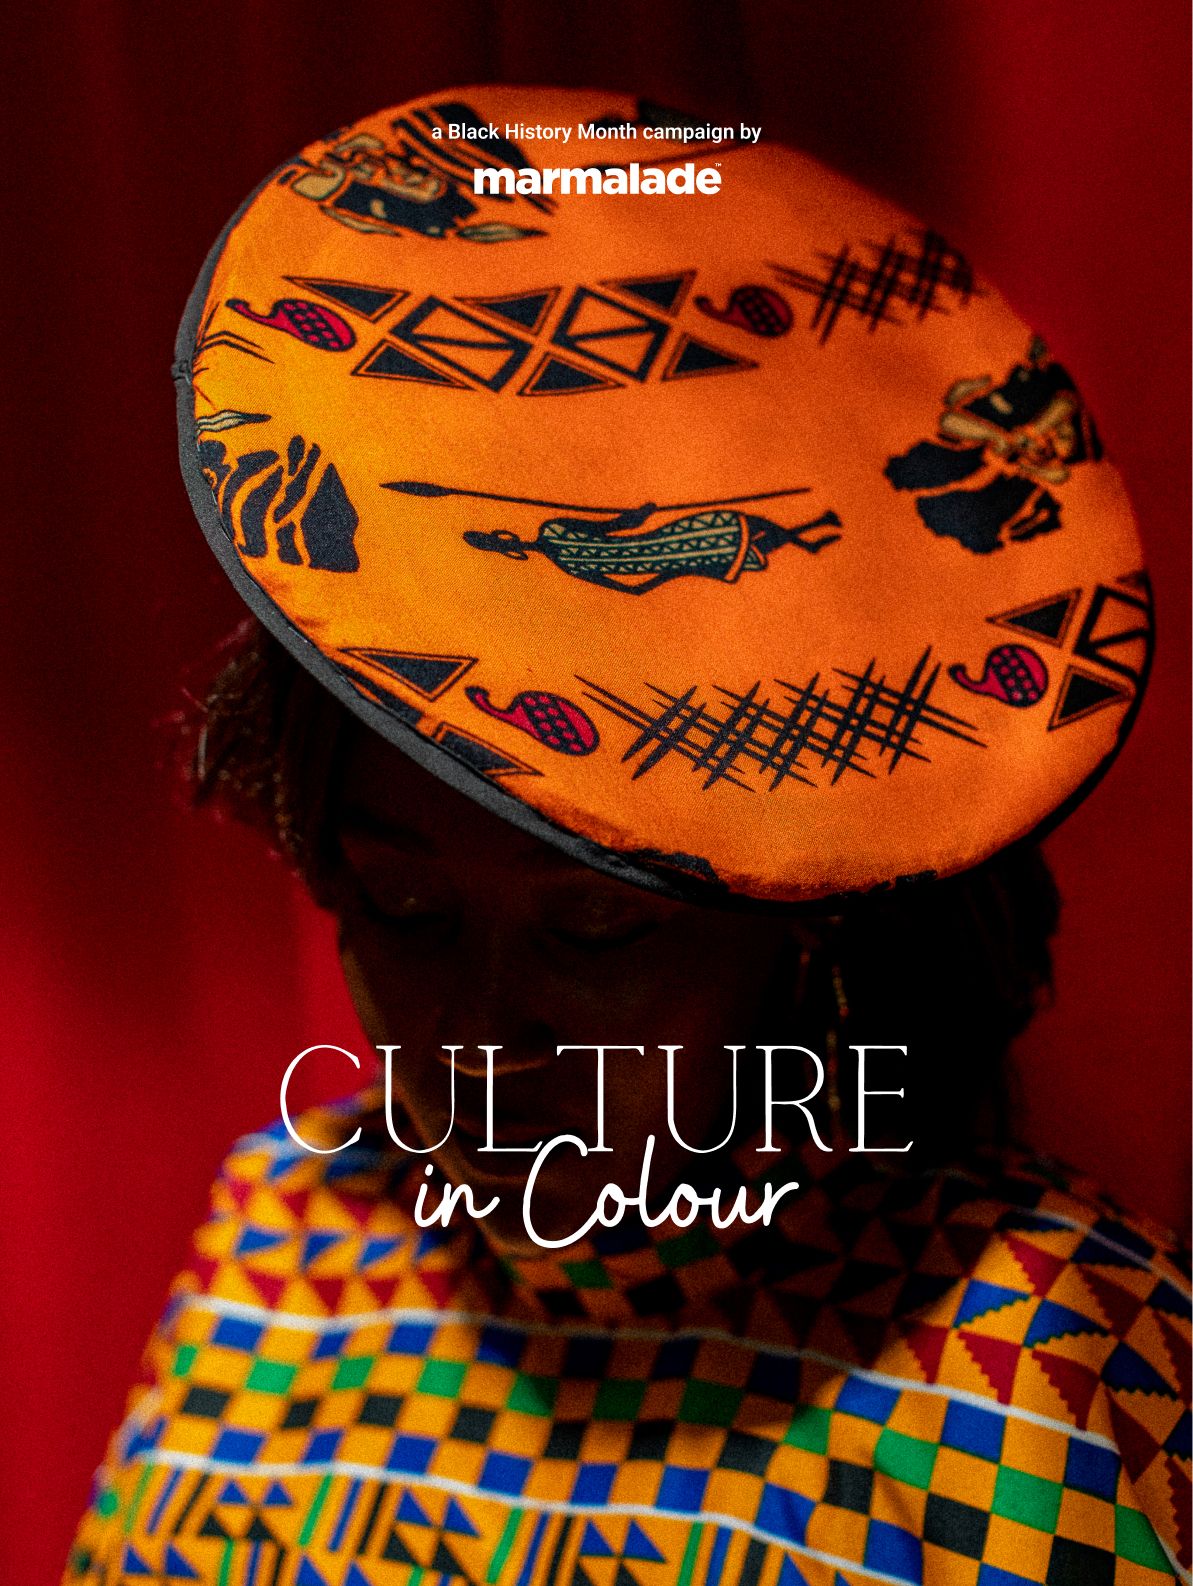 Beyond Black: Culture in Colour, East & South Africa 🇿🇦